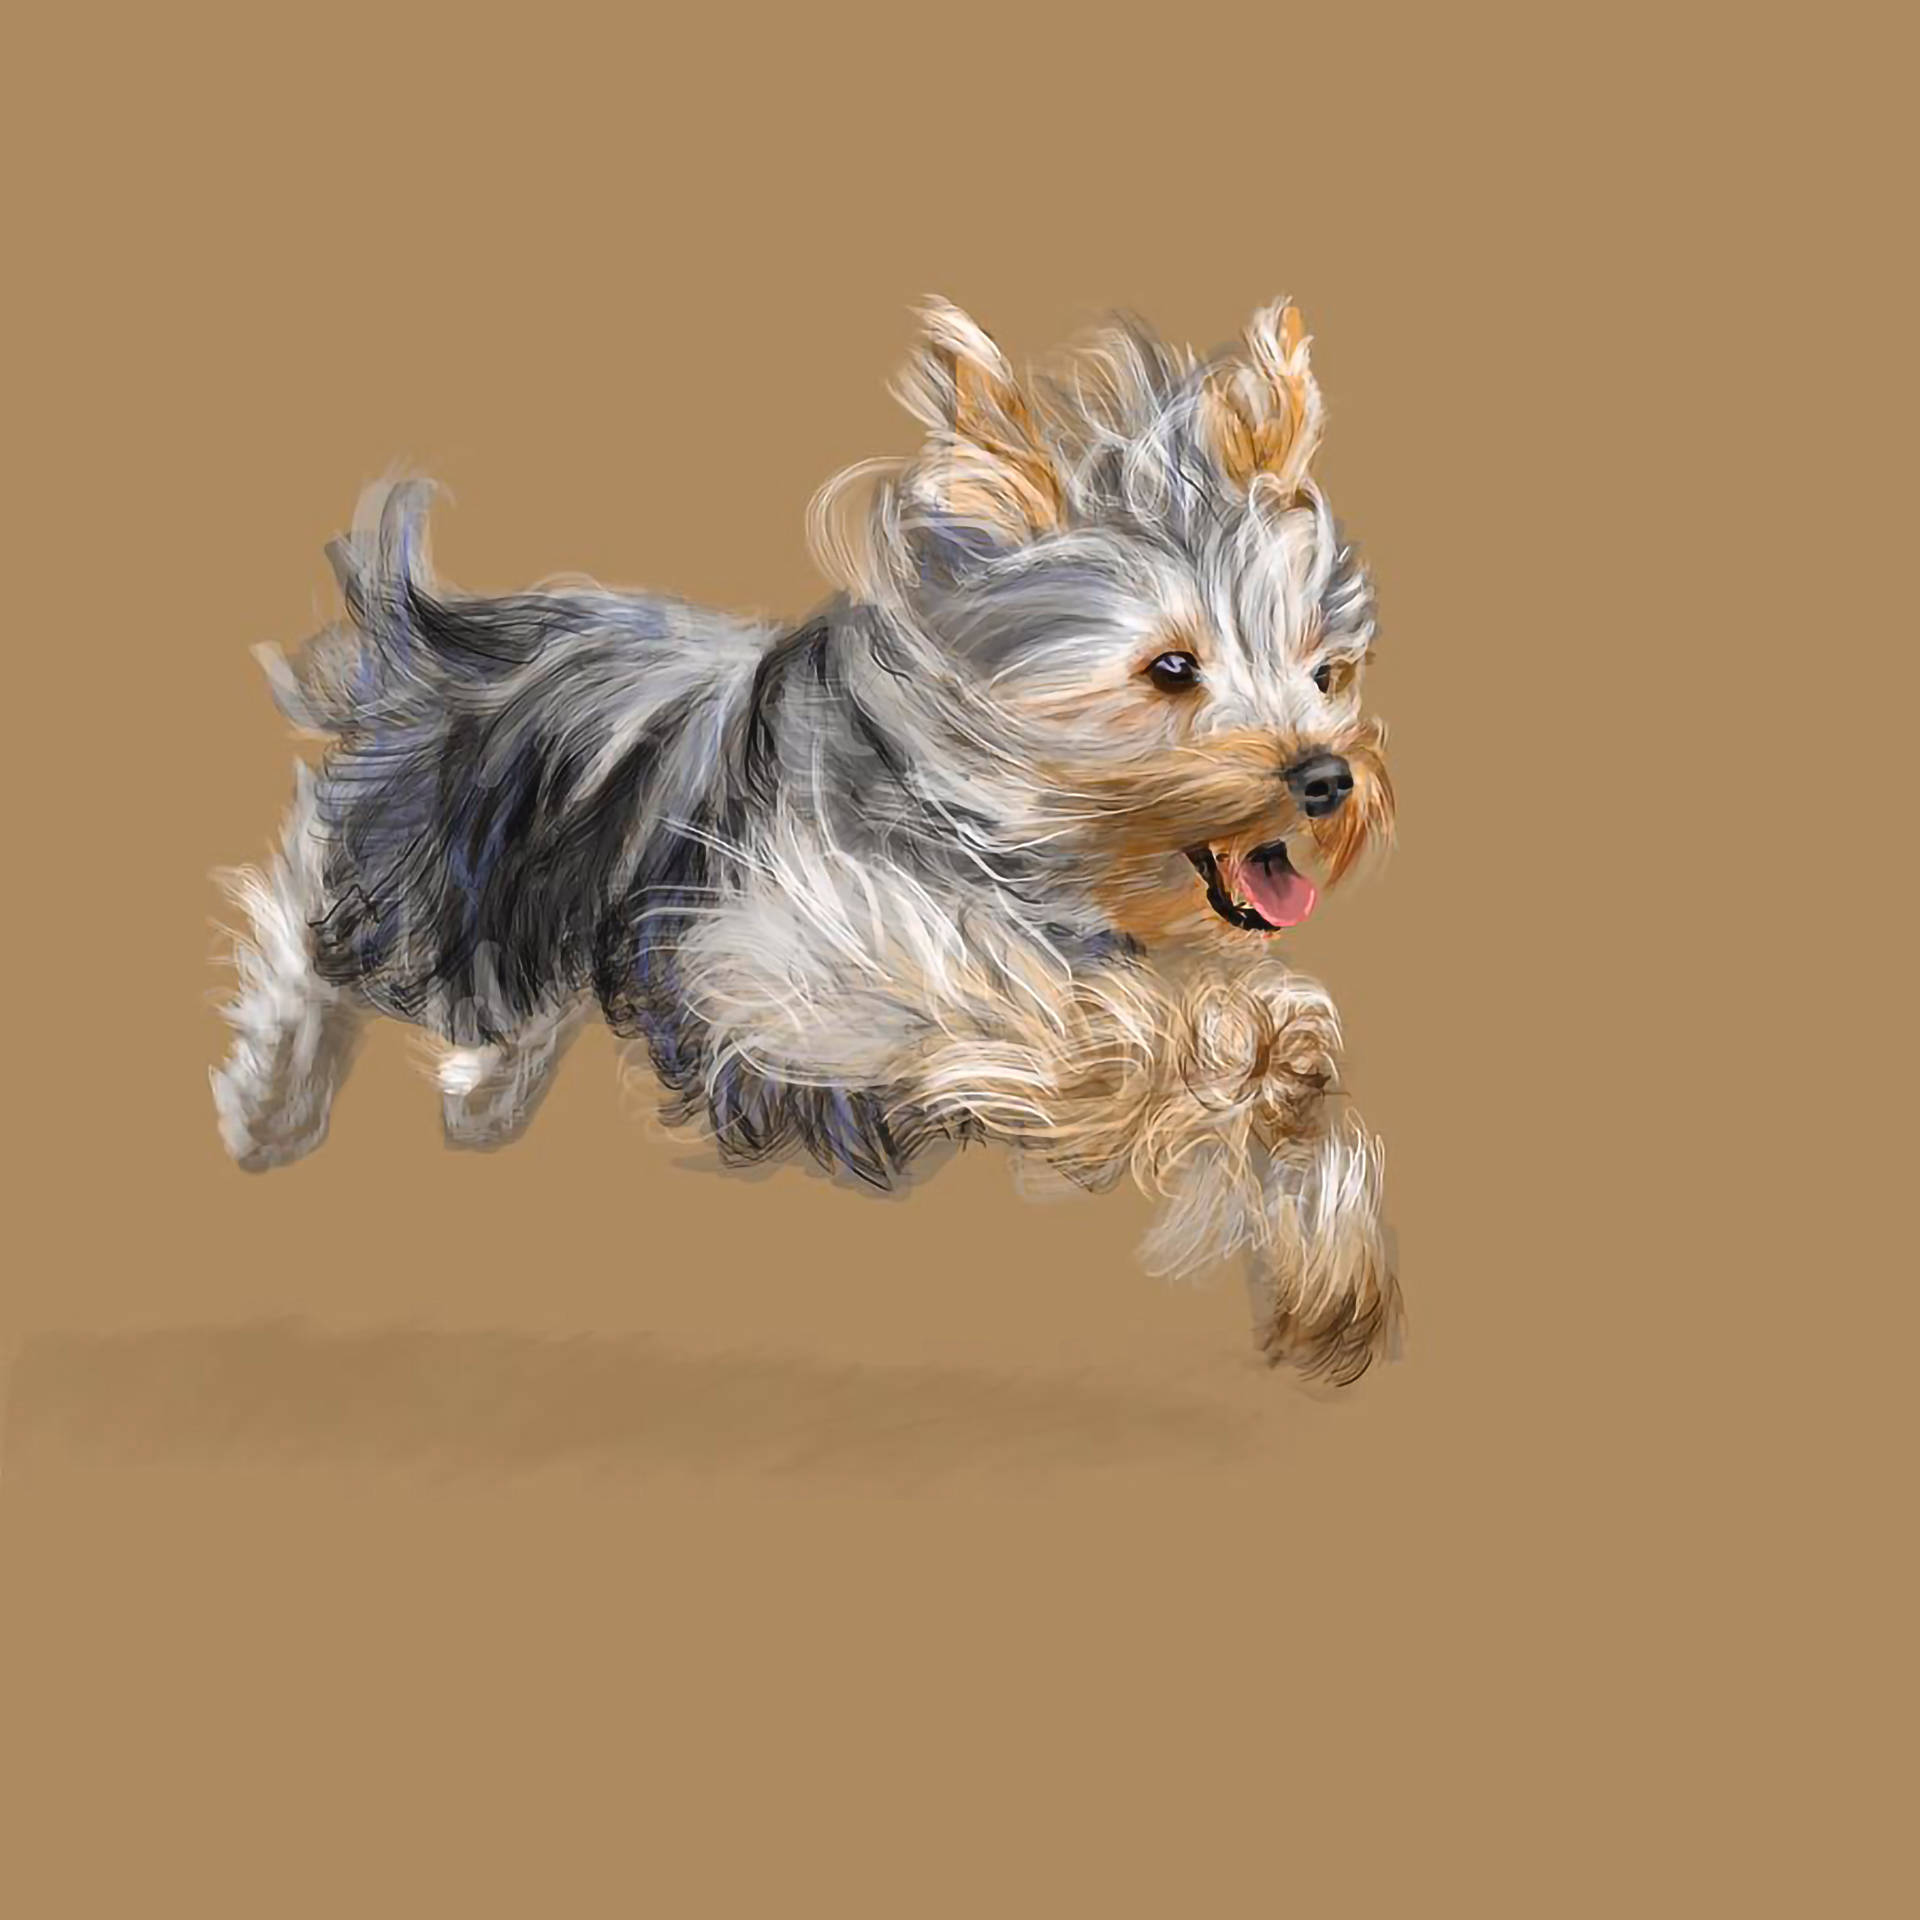 A mid-air Yorkie Puppy showcasing playful energy Wallpaper